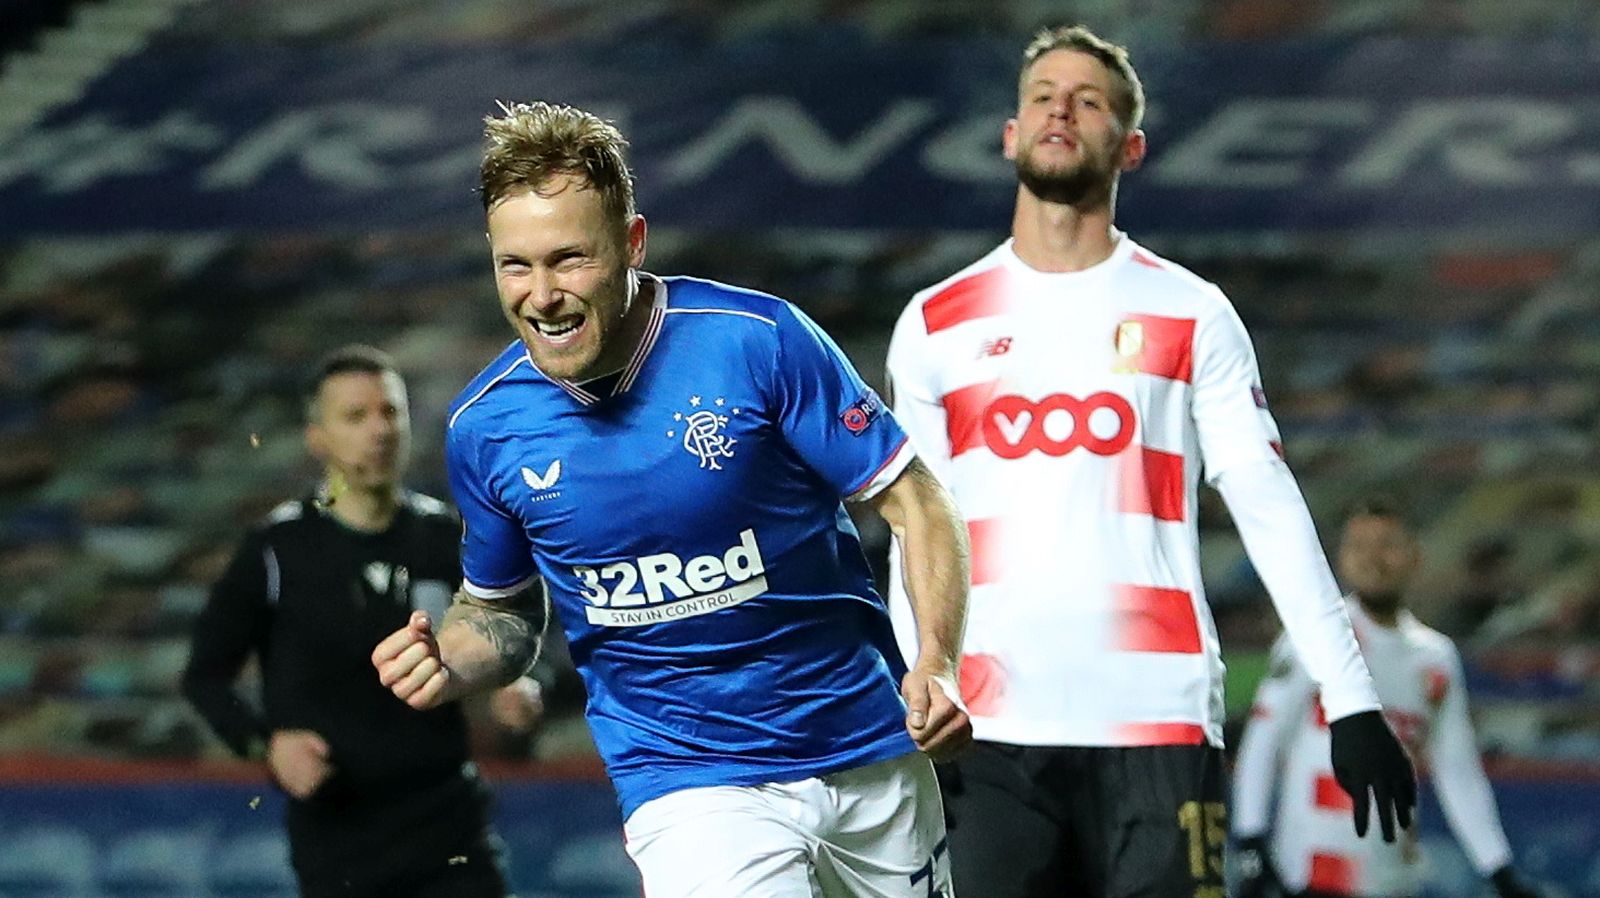 epa08860763 Scott Arfield (L) of Rangers celebrates after scoring the 3-2 lead during the UEFA Europa League group D soccer match between Glasgow Rangers and Standard Liege in Glasgow, Britain, 03 December 2020.  EPA/Jane Barlow / POOL